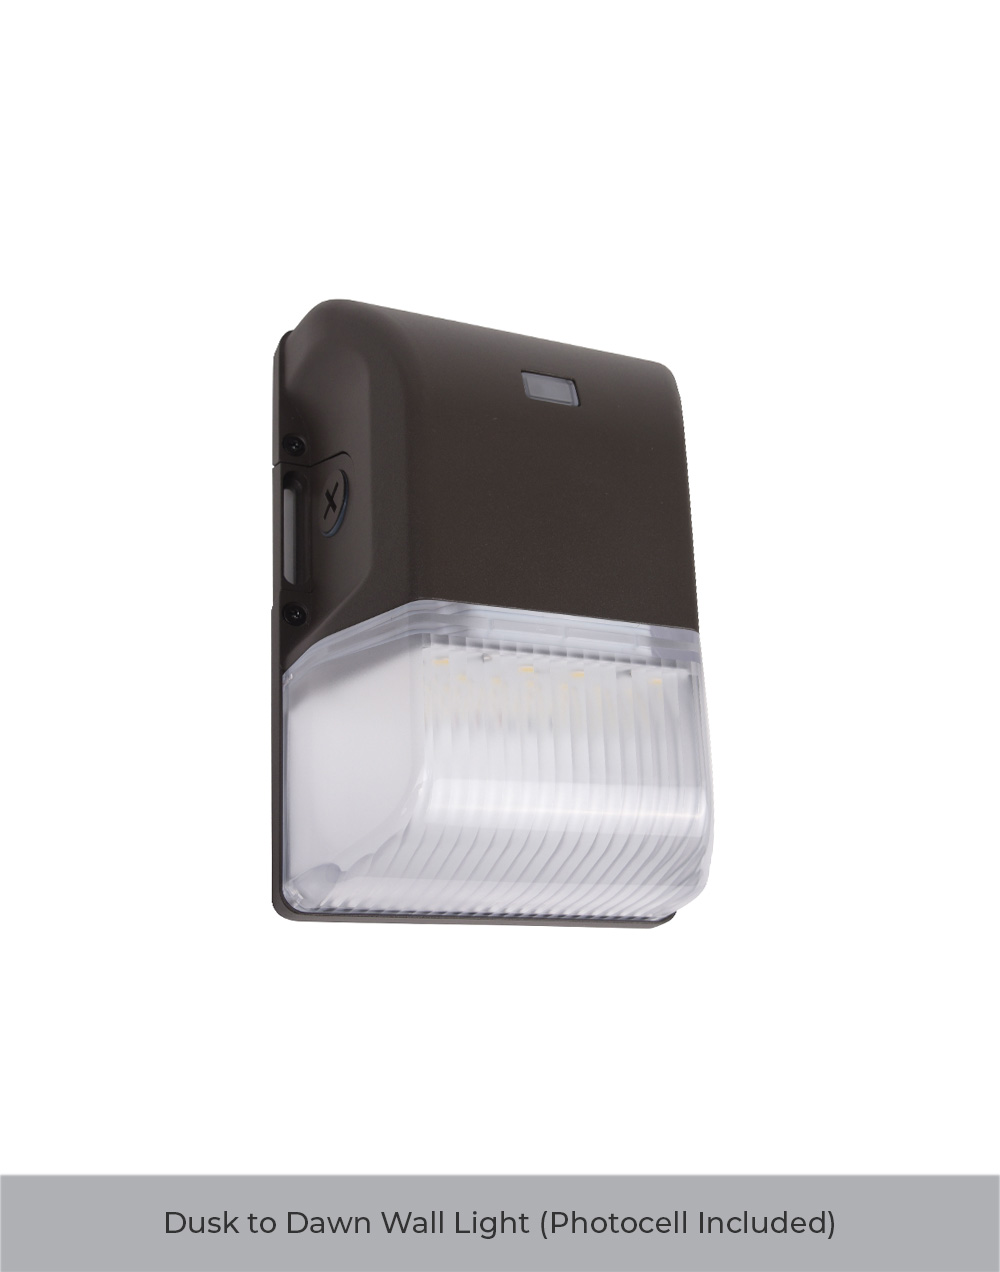 naturaled Security Dusk to Dawn Mini Wall Lights Photocell Included